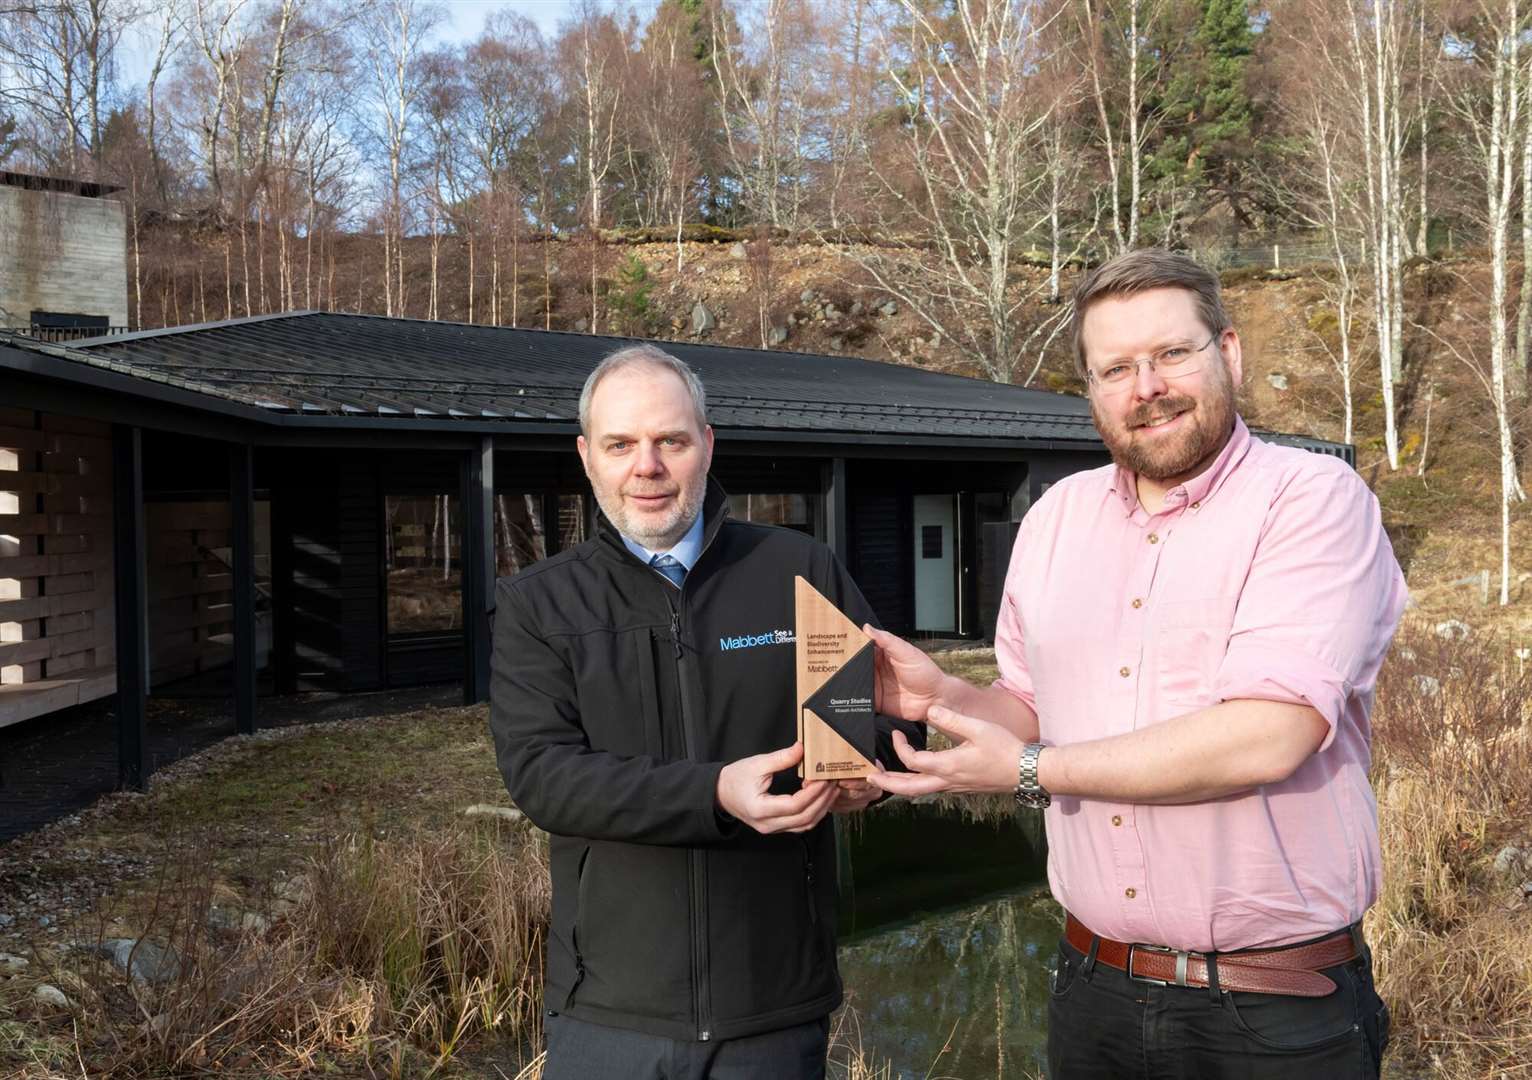 The overall winner of the Landscape and Biodiversity Enhancement category was Moxon Architects for their entry, Quarry Studios. The trophy was presented by Kenny Shand from Mabbett Ltd to Andrew Macpherson on behalf of Moxon Architects.